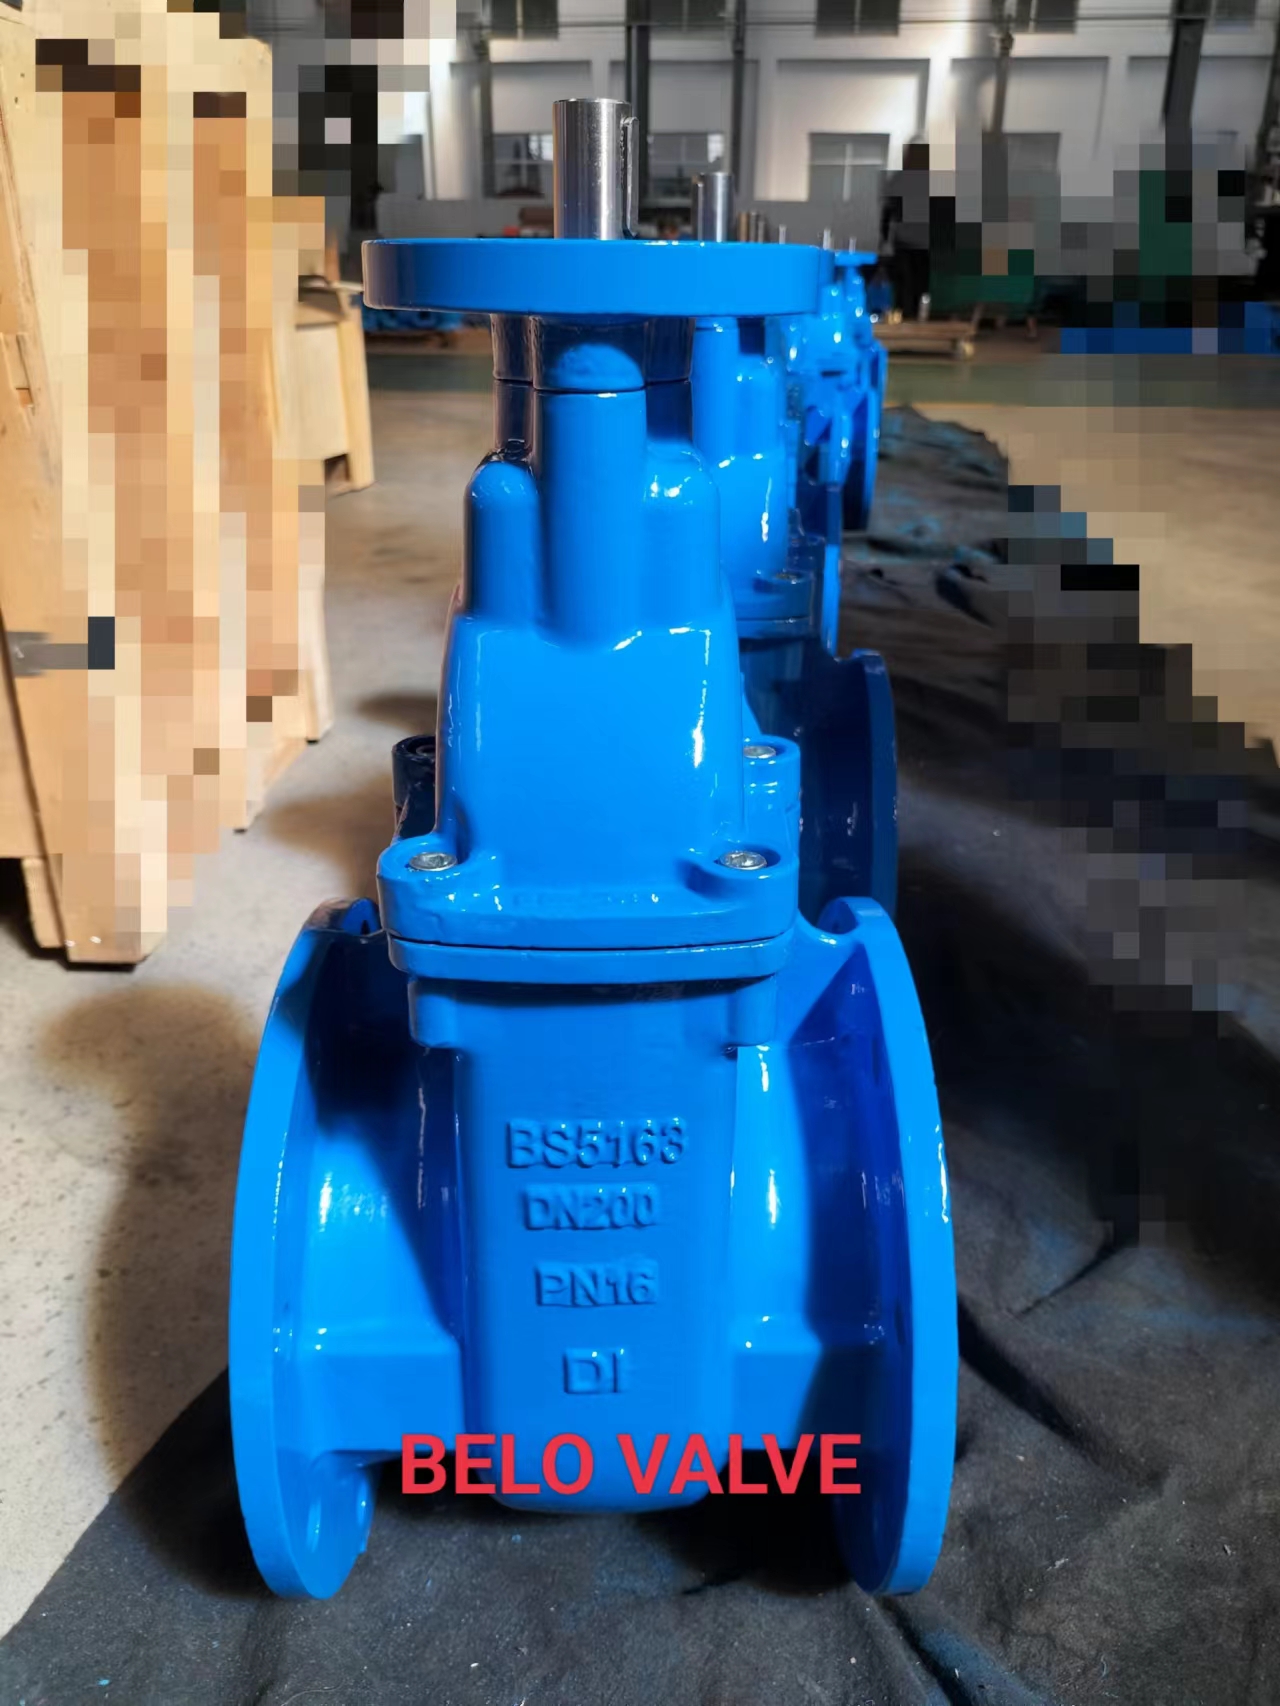 BS5163 ductile iron DN200 PN16 non rising stem metal to metal seated flanged gate valve-Belo Valve